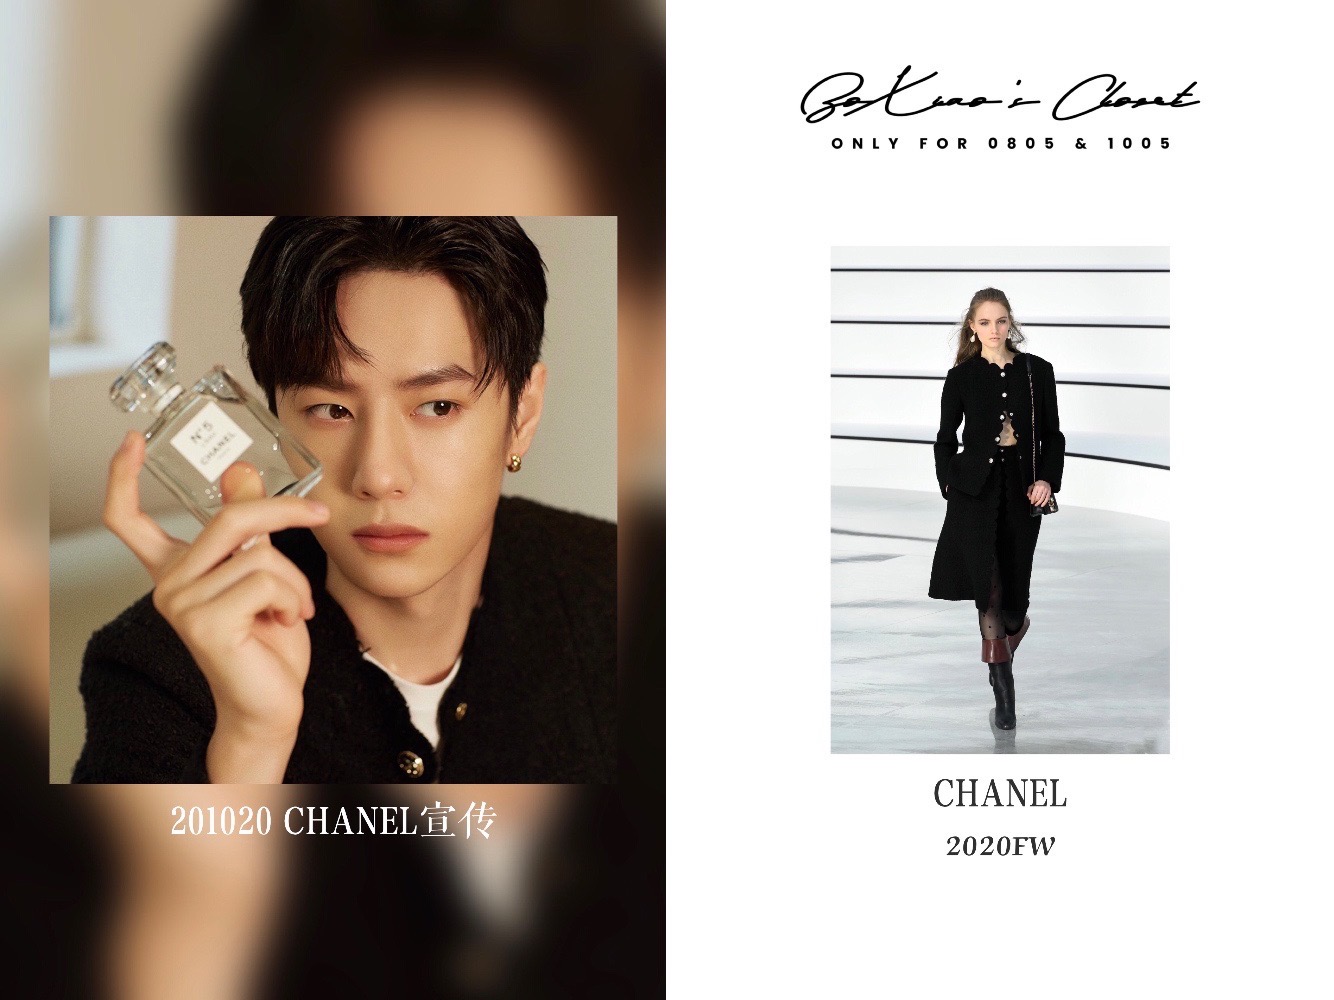 BoXiao's Closet on X: 20201020 CHANEL Jacket, CHANEL 2020FW Earring, CHANEL Coco Crush perfume